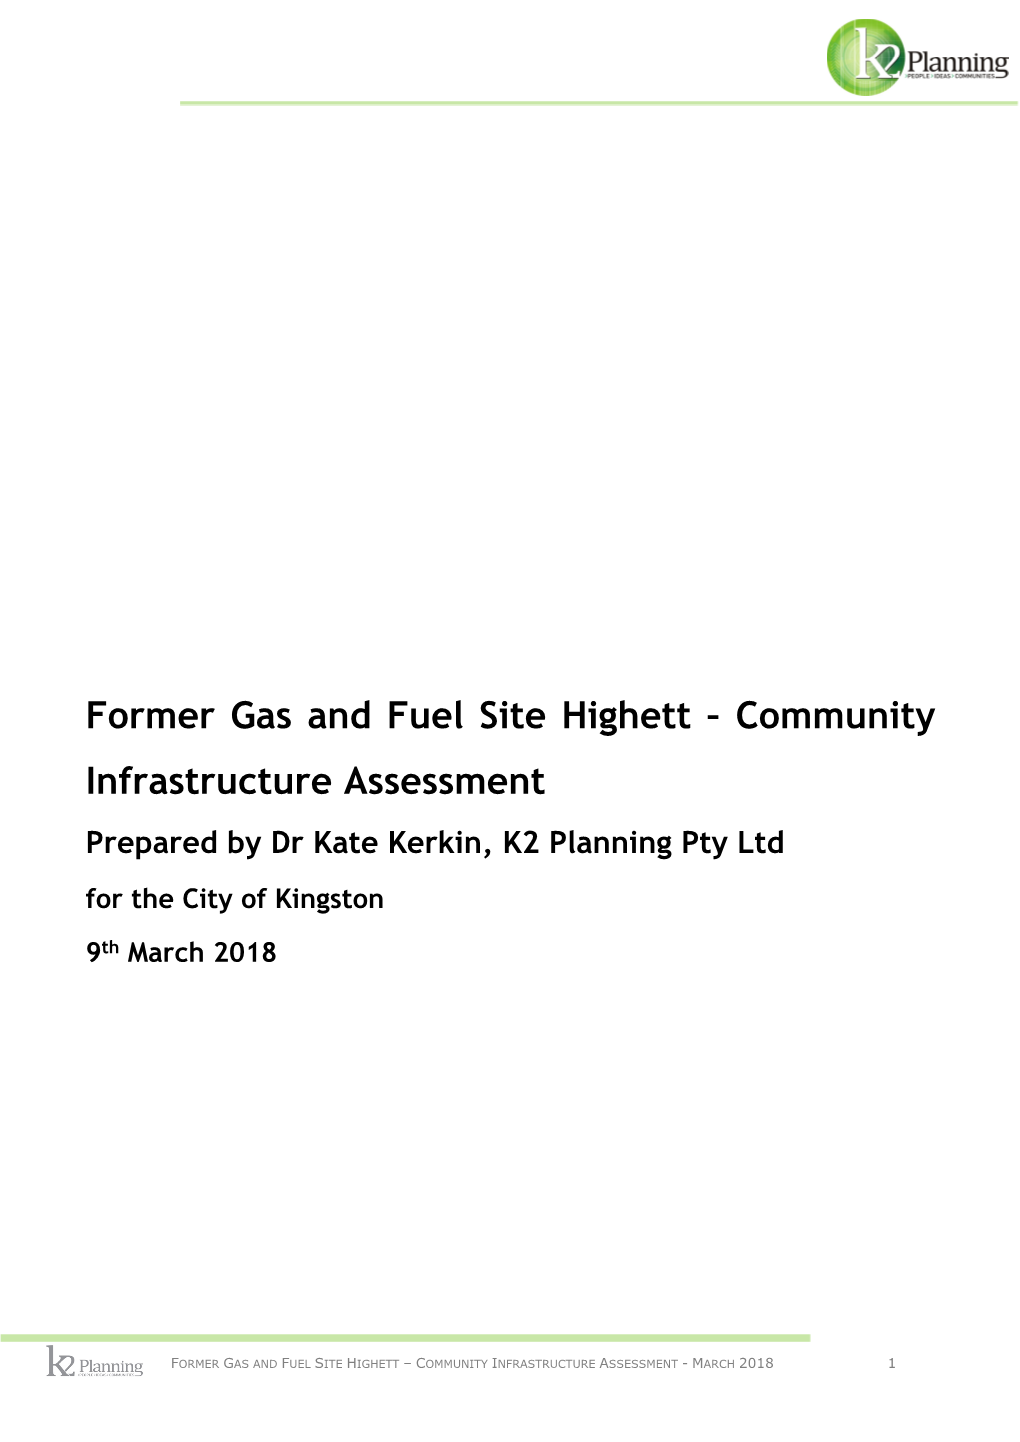 Community Infrastructure Assessment Prepared by Dr Kate Kerkin, K2 Planning Pty Ltd for the City of Kingston 9Th March 2018